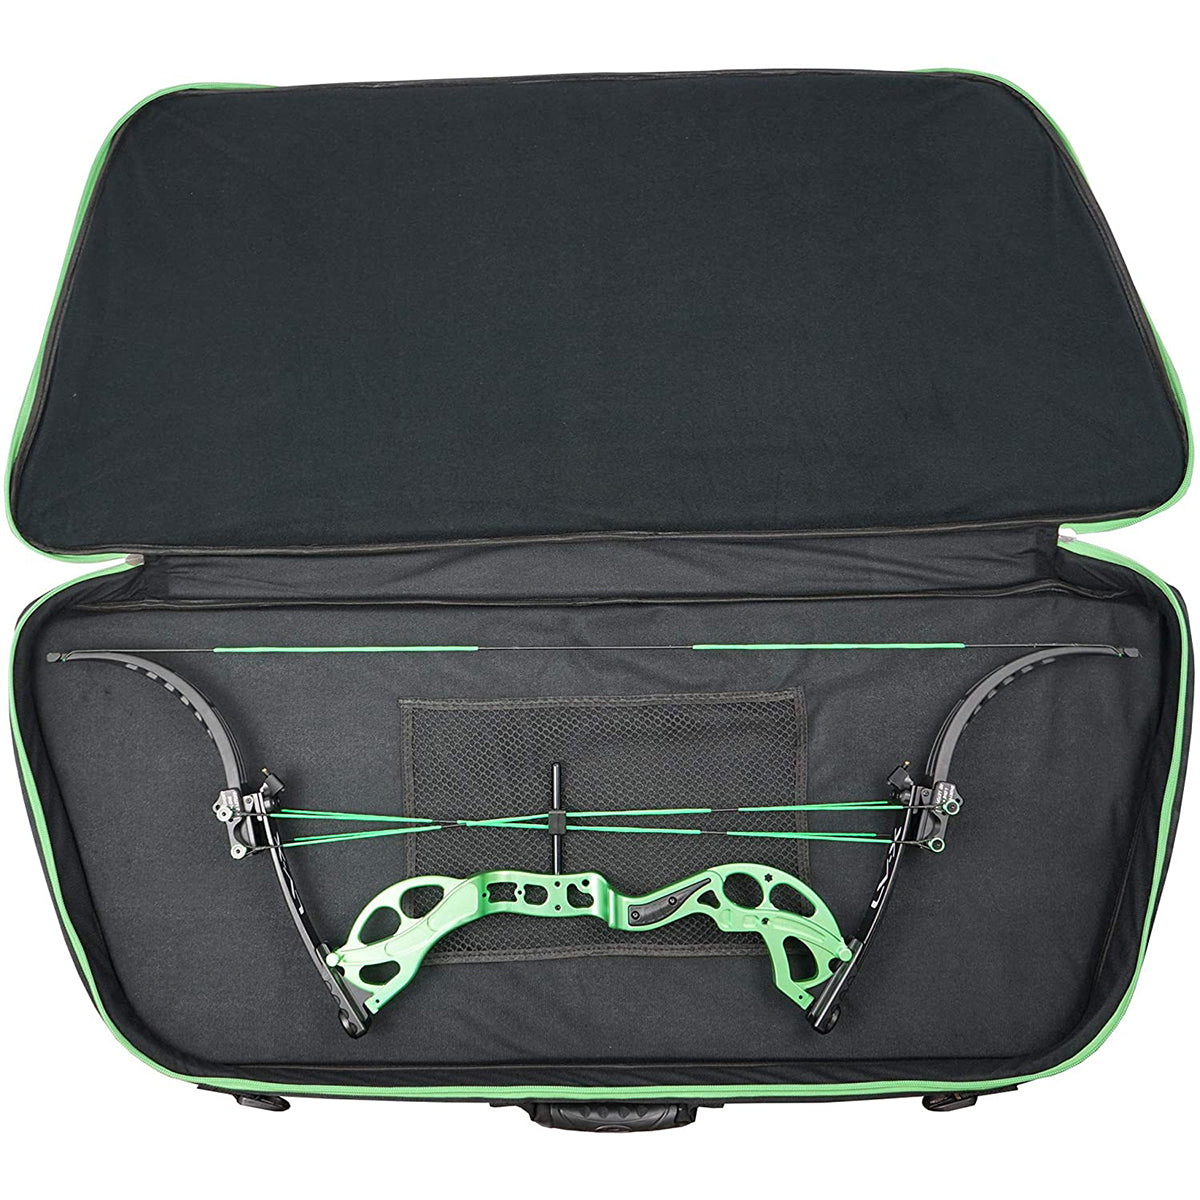 Muzzy Bowfishing Soft-Sided Bow Carrying Case Muzzy